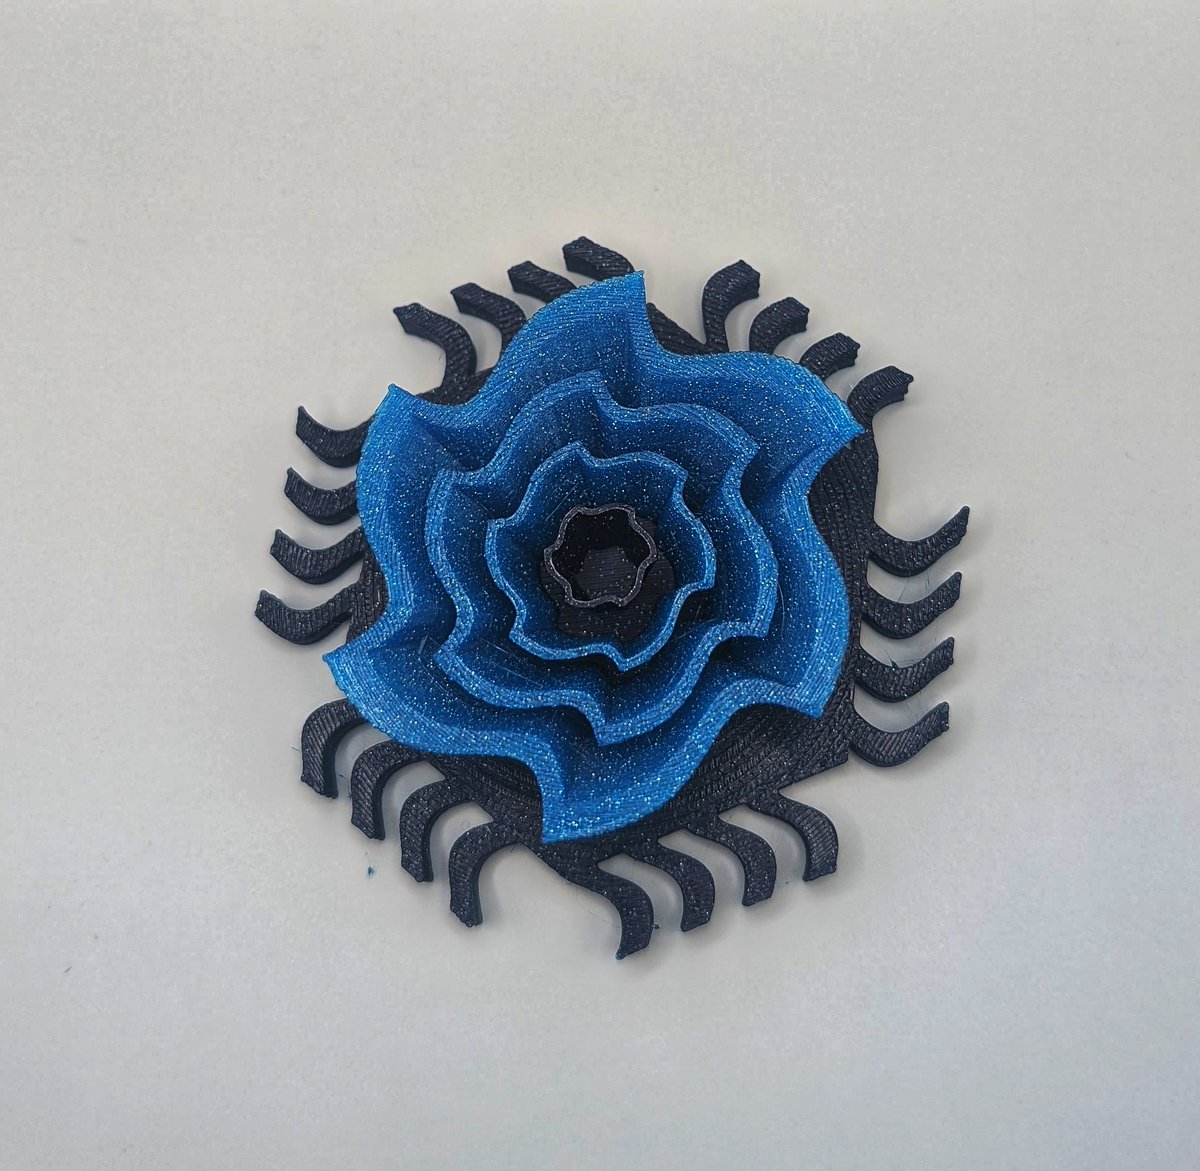 My contribution to the Layer Connections Community Artwork by @3DPrintBunny made with @Polymaker_3D Galaxy Dark Blue and @captubes Night Sky - turned out beautiful! thangs.com/designer/3dpri…